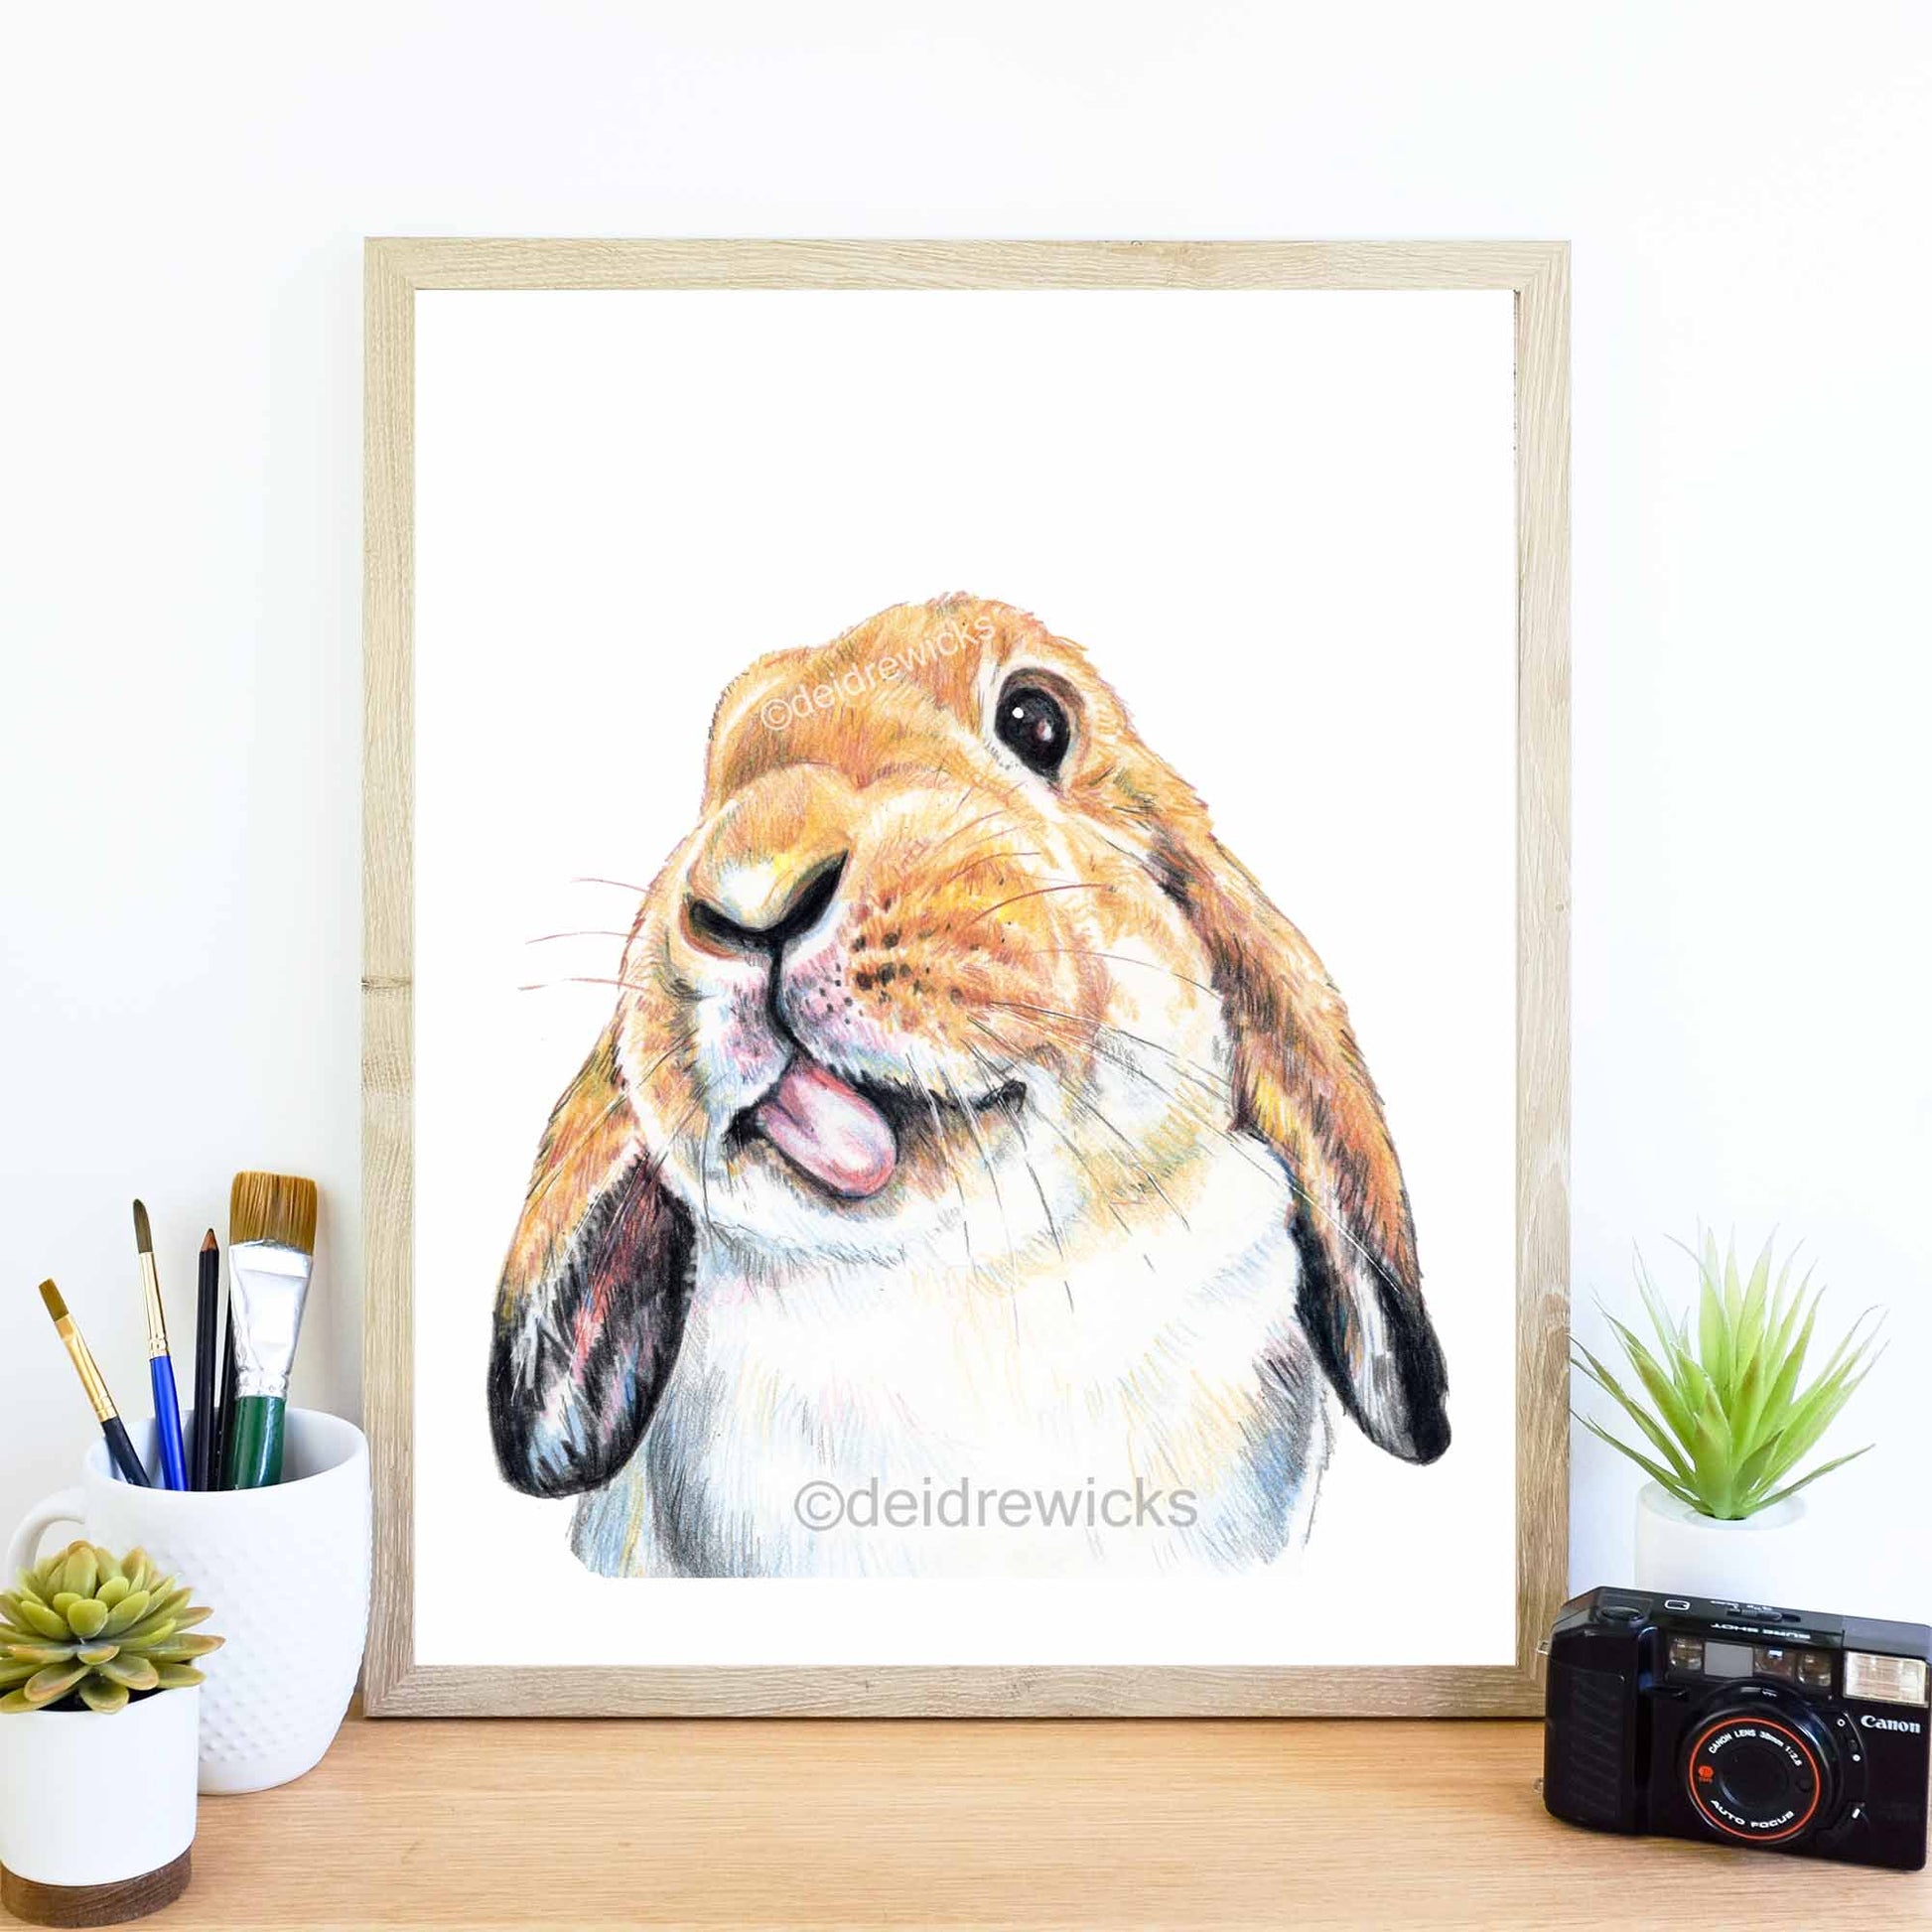 Framed example of a coloured pencil drawing of a lop eared rabbit. Art print by Deidre Wicks